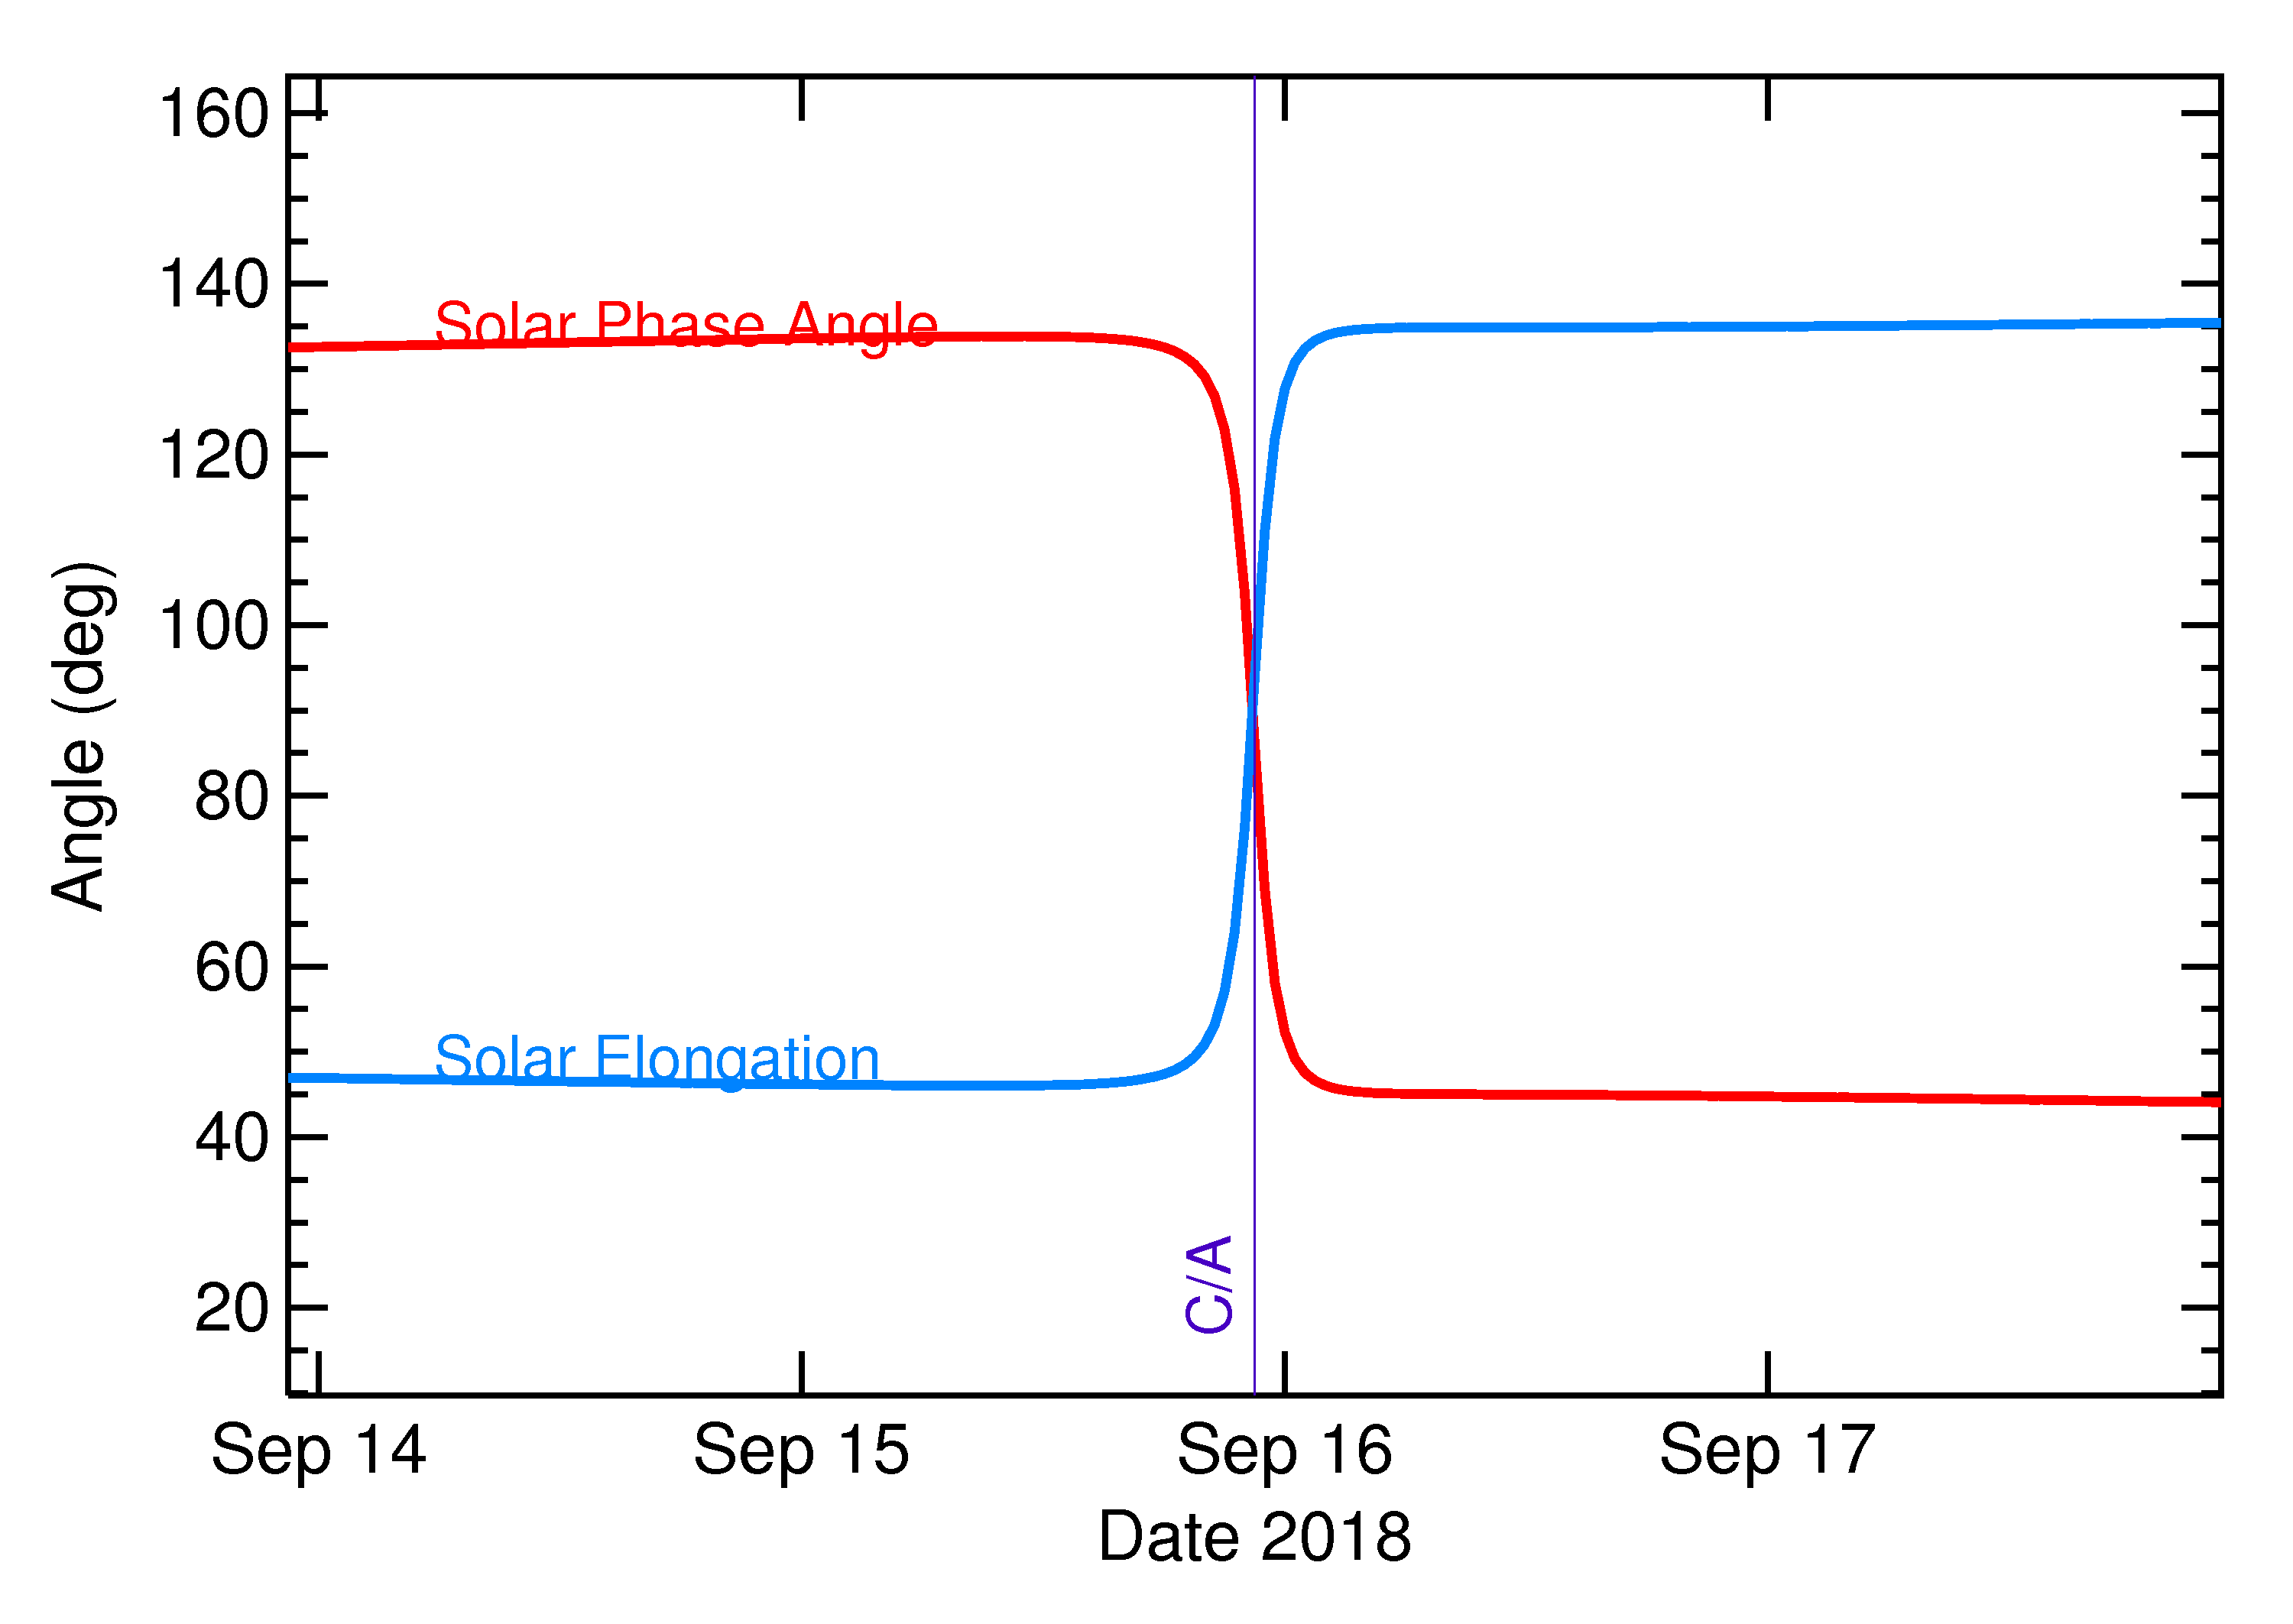 Solar Elongation and Solar Phase Angle of 2018 SM in the days around closest approach